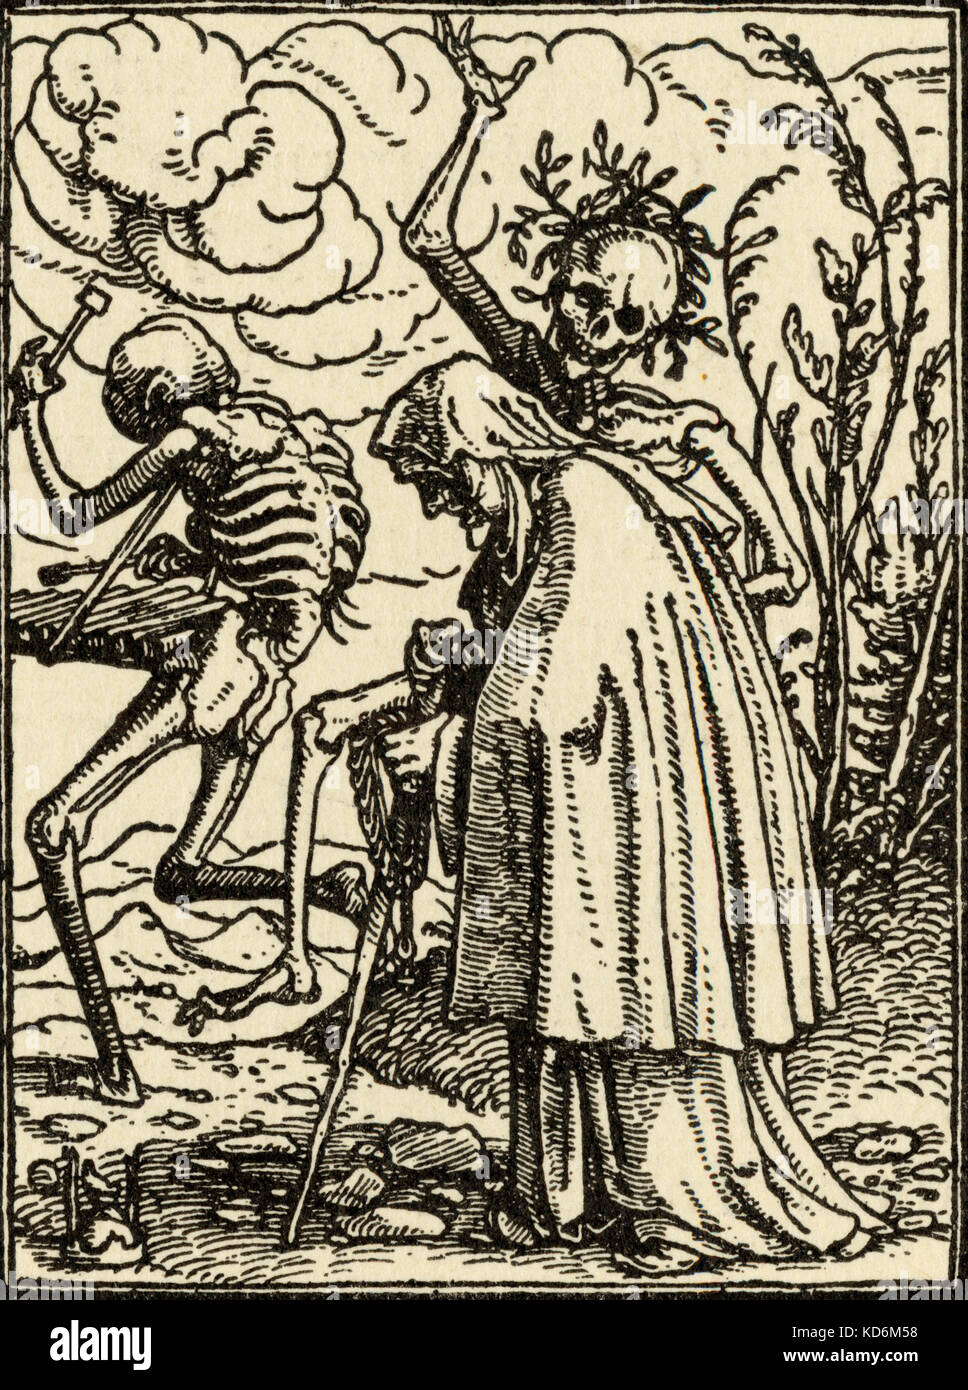 Holbein's ' Dance of Death ' showing death playing xylophone.  Skeletons. Engraving c. 1538, 16th century Renaissance. Stock Photo